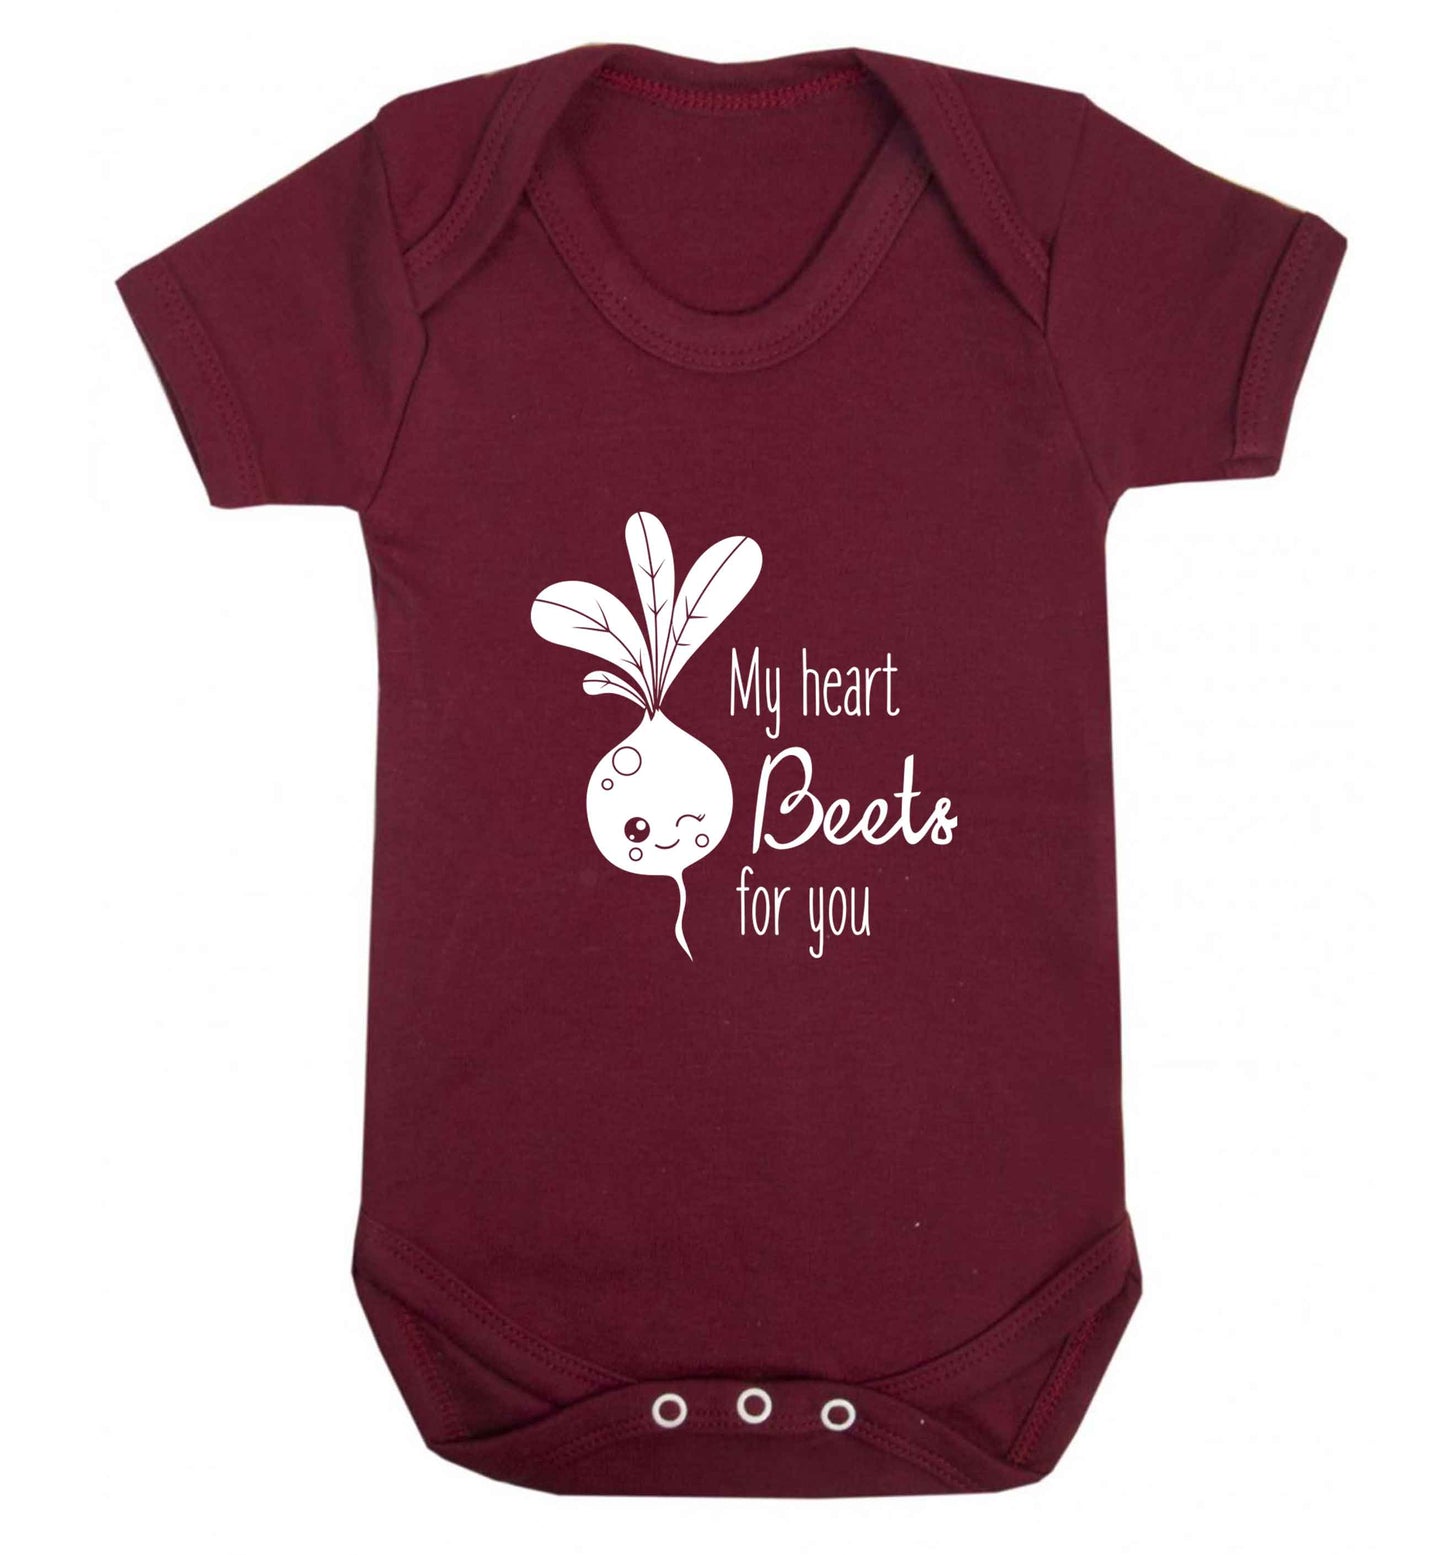 My heart beets for you baby vest maroon 18-24 months